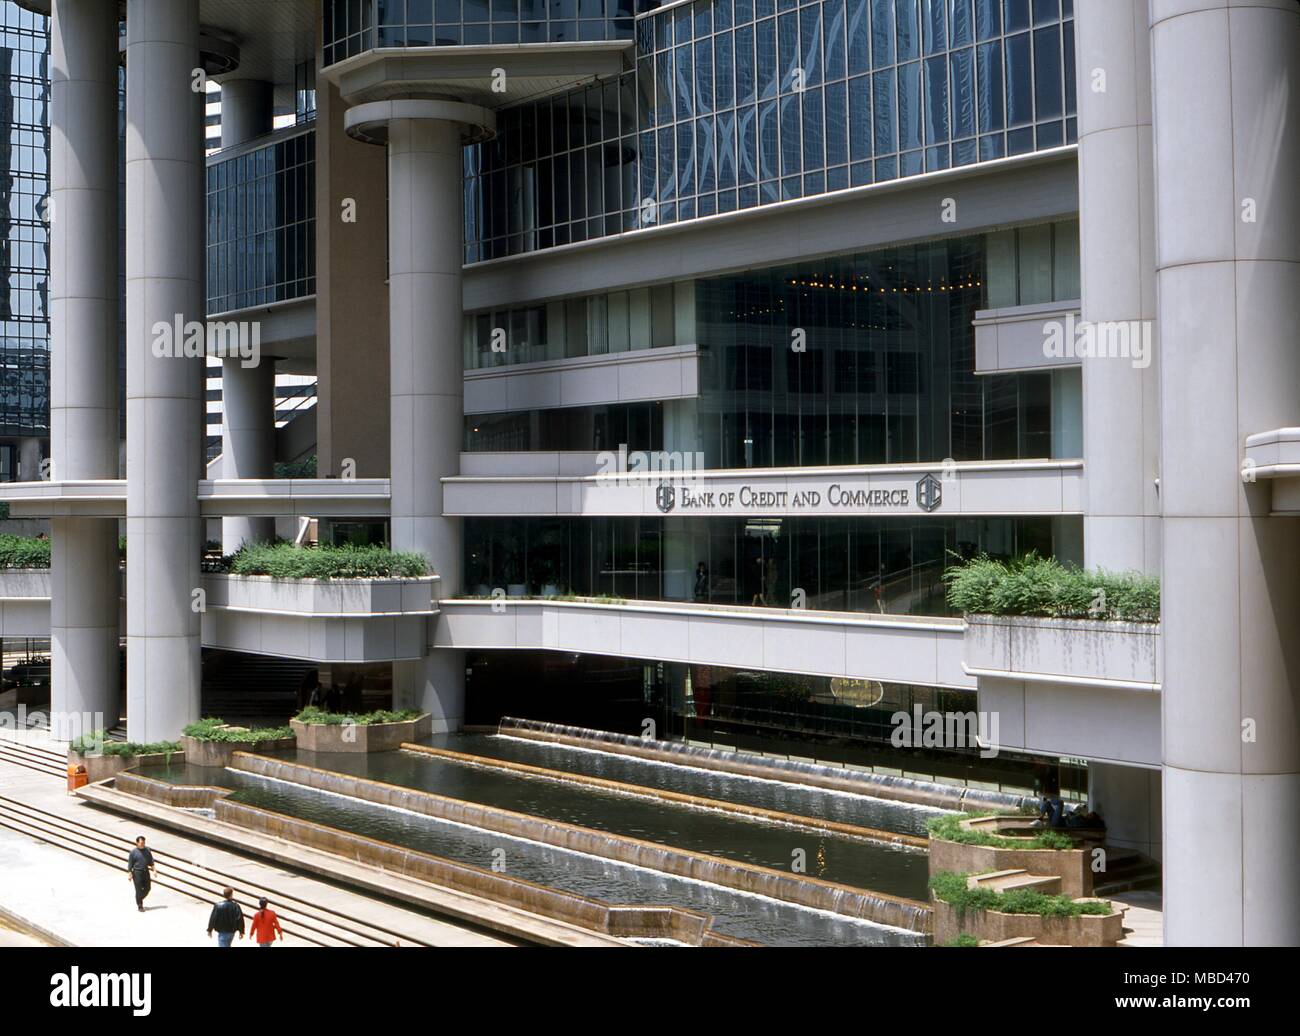 Feng Shui - The Bond Centre, Hong Kong, which housed the Bank of Credit and Commerce. The pool water, running away from the bank and into the road was bad Feng Shui, and led experts to predit rightly the demise of the bank. - ©Charles Walker / Stock Photo